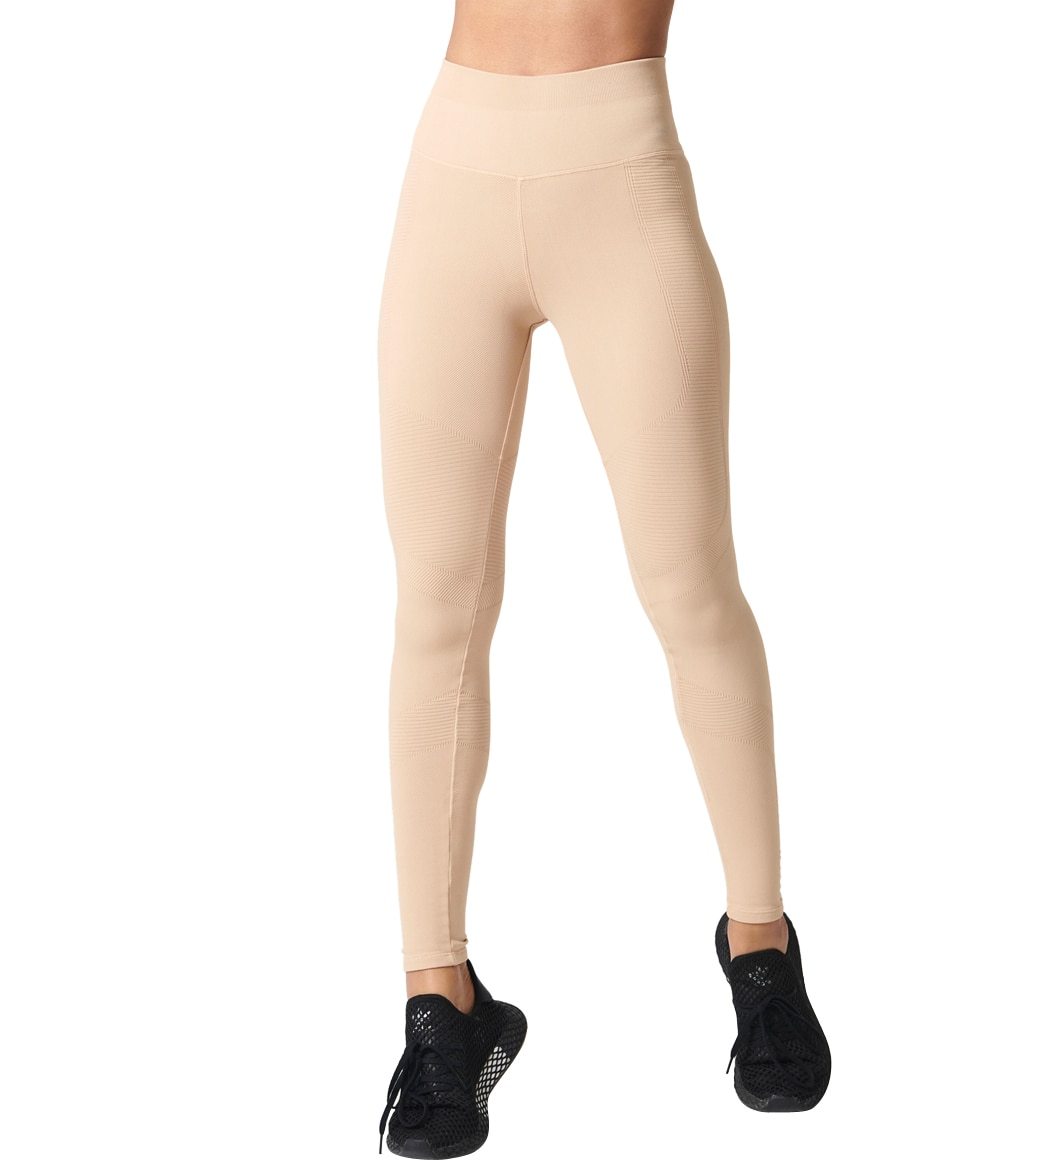 NUX Women's One By Seamles Yoga Legging - Peachy Sand Small Spandex